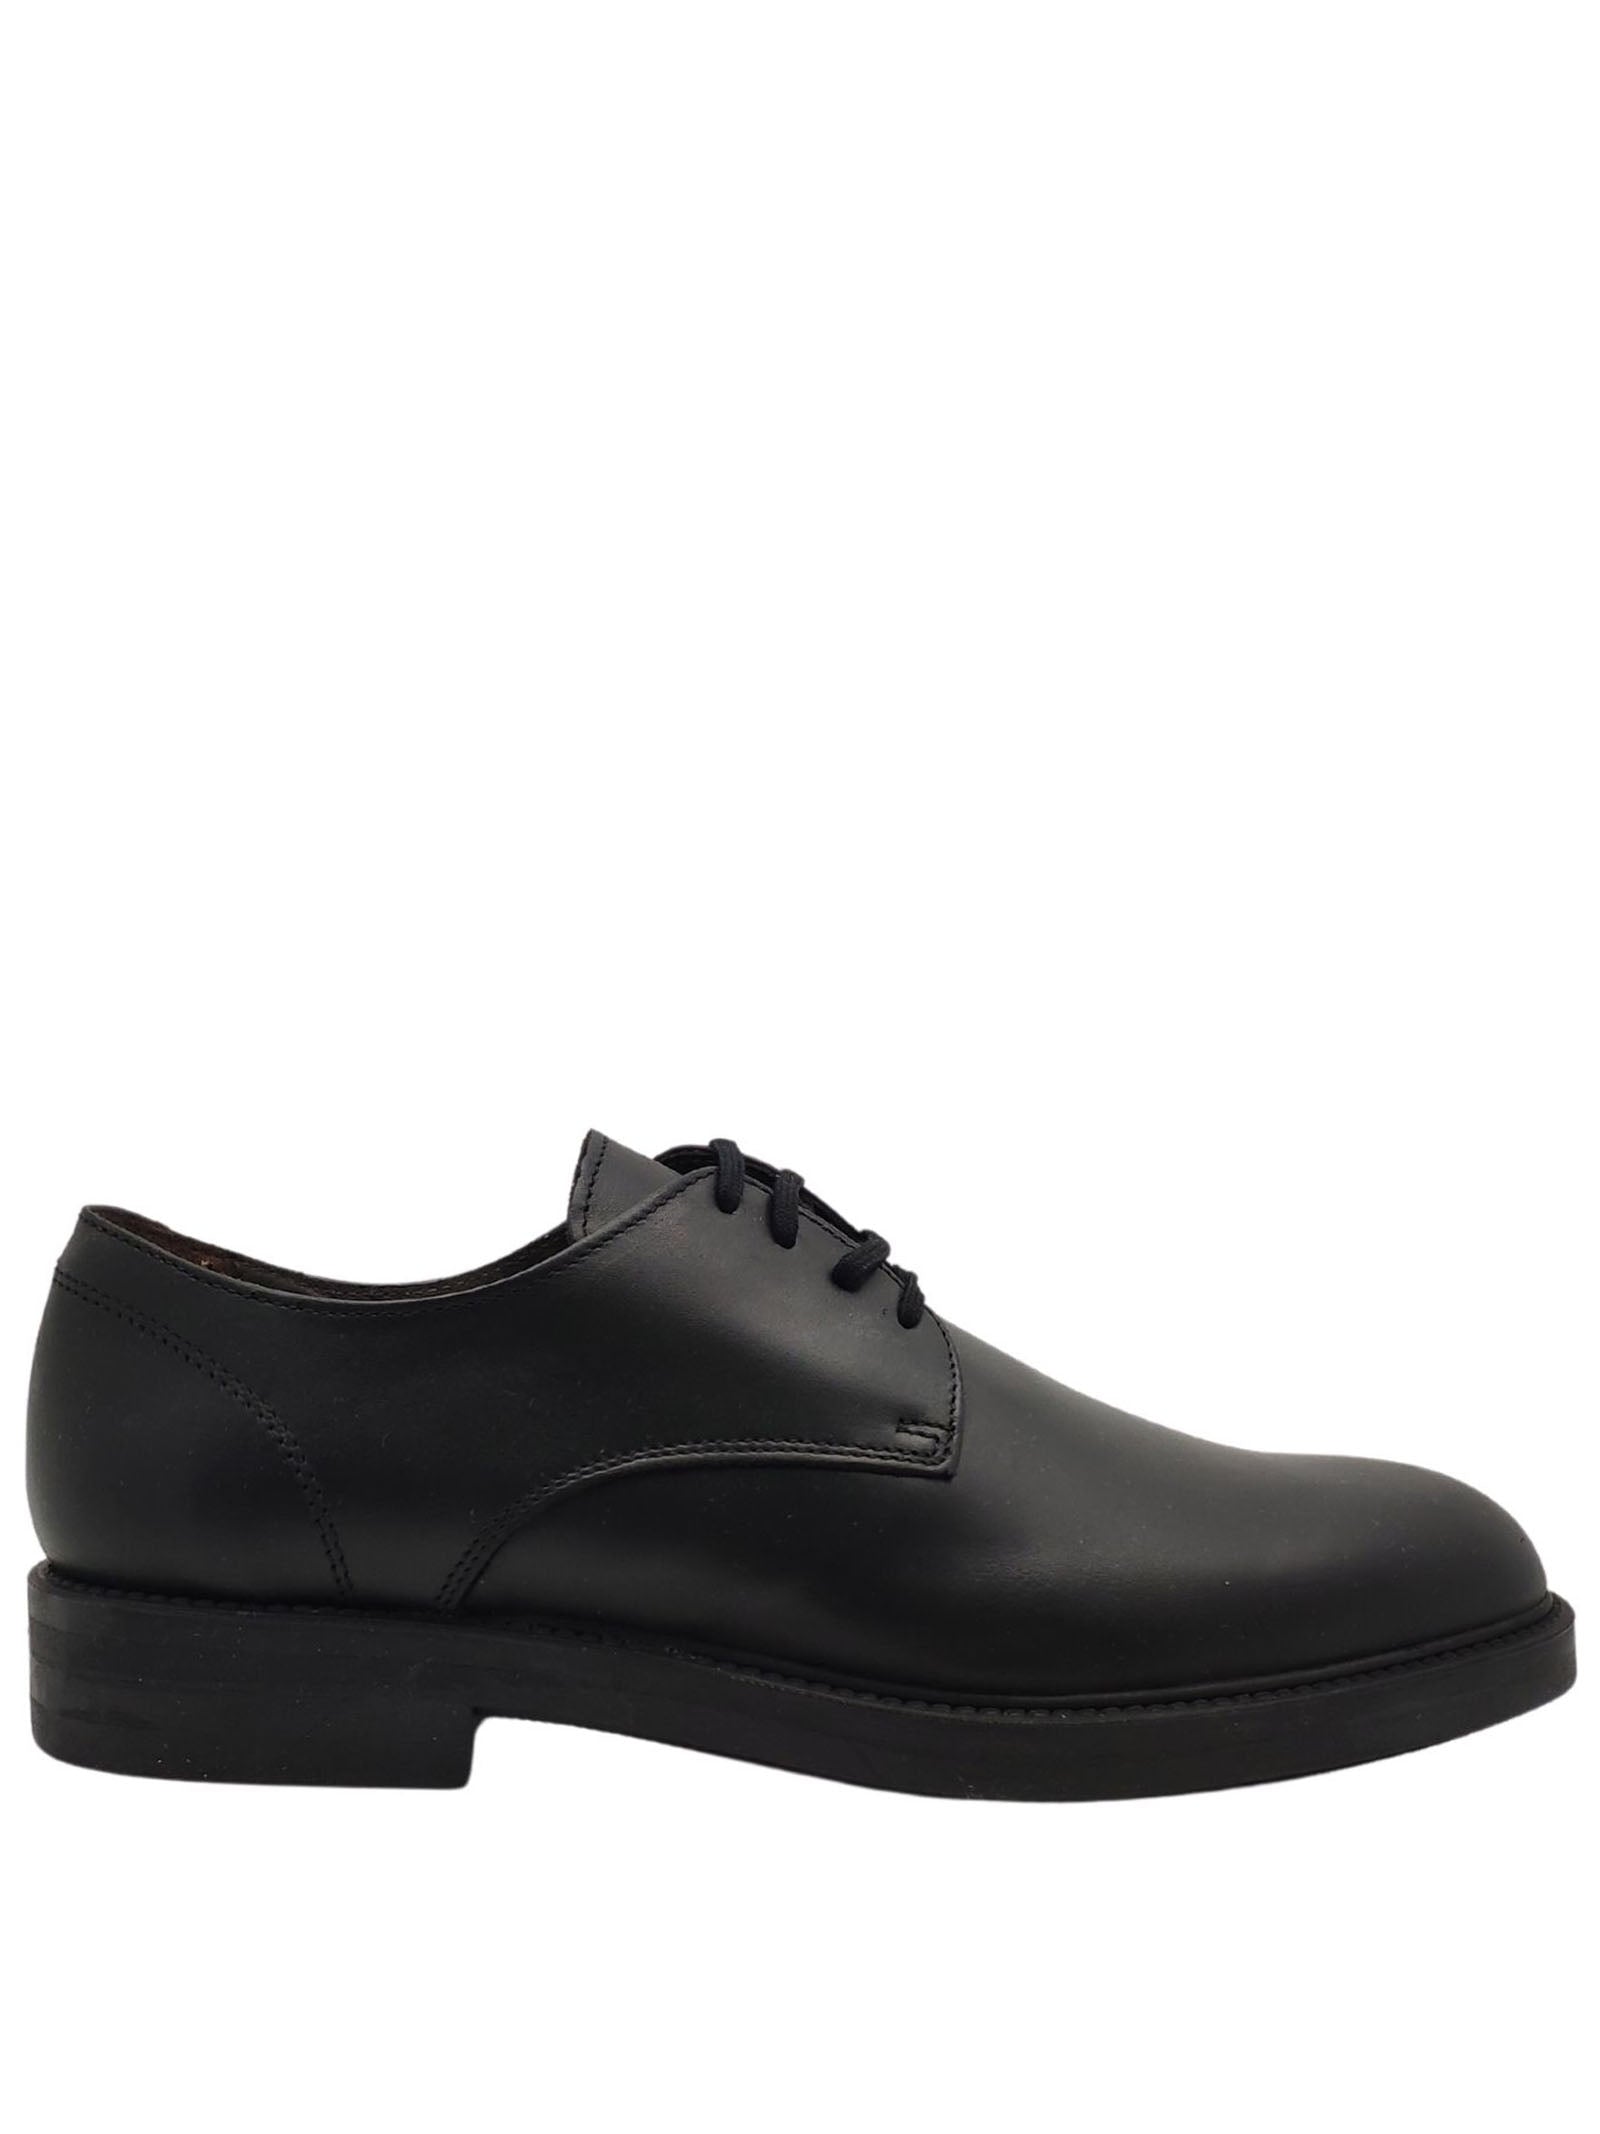 Men's Waterproof Lace-Up Shoes in Matte Black Leather with Smooth Upper and Rubber Sole